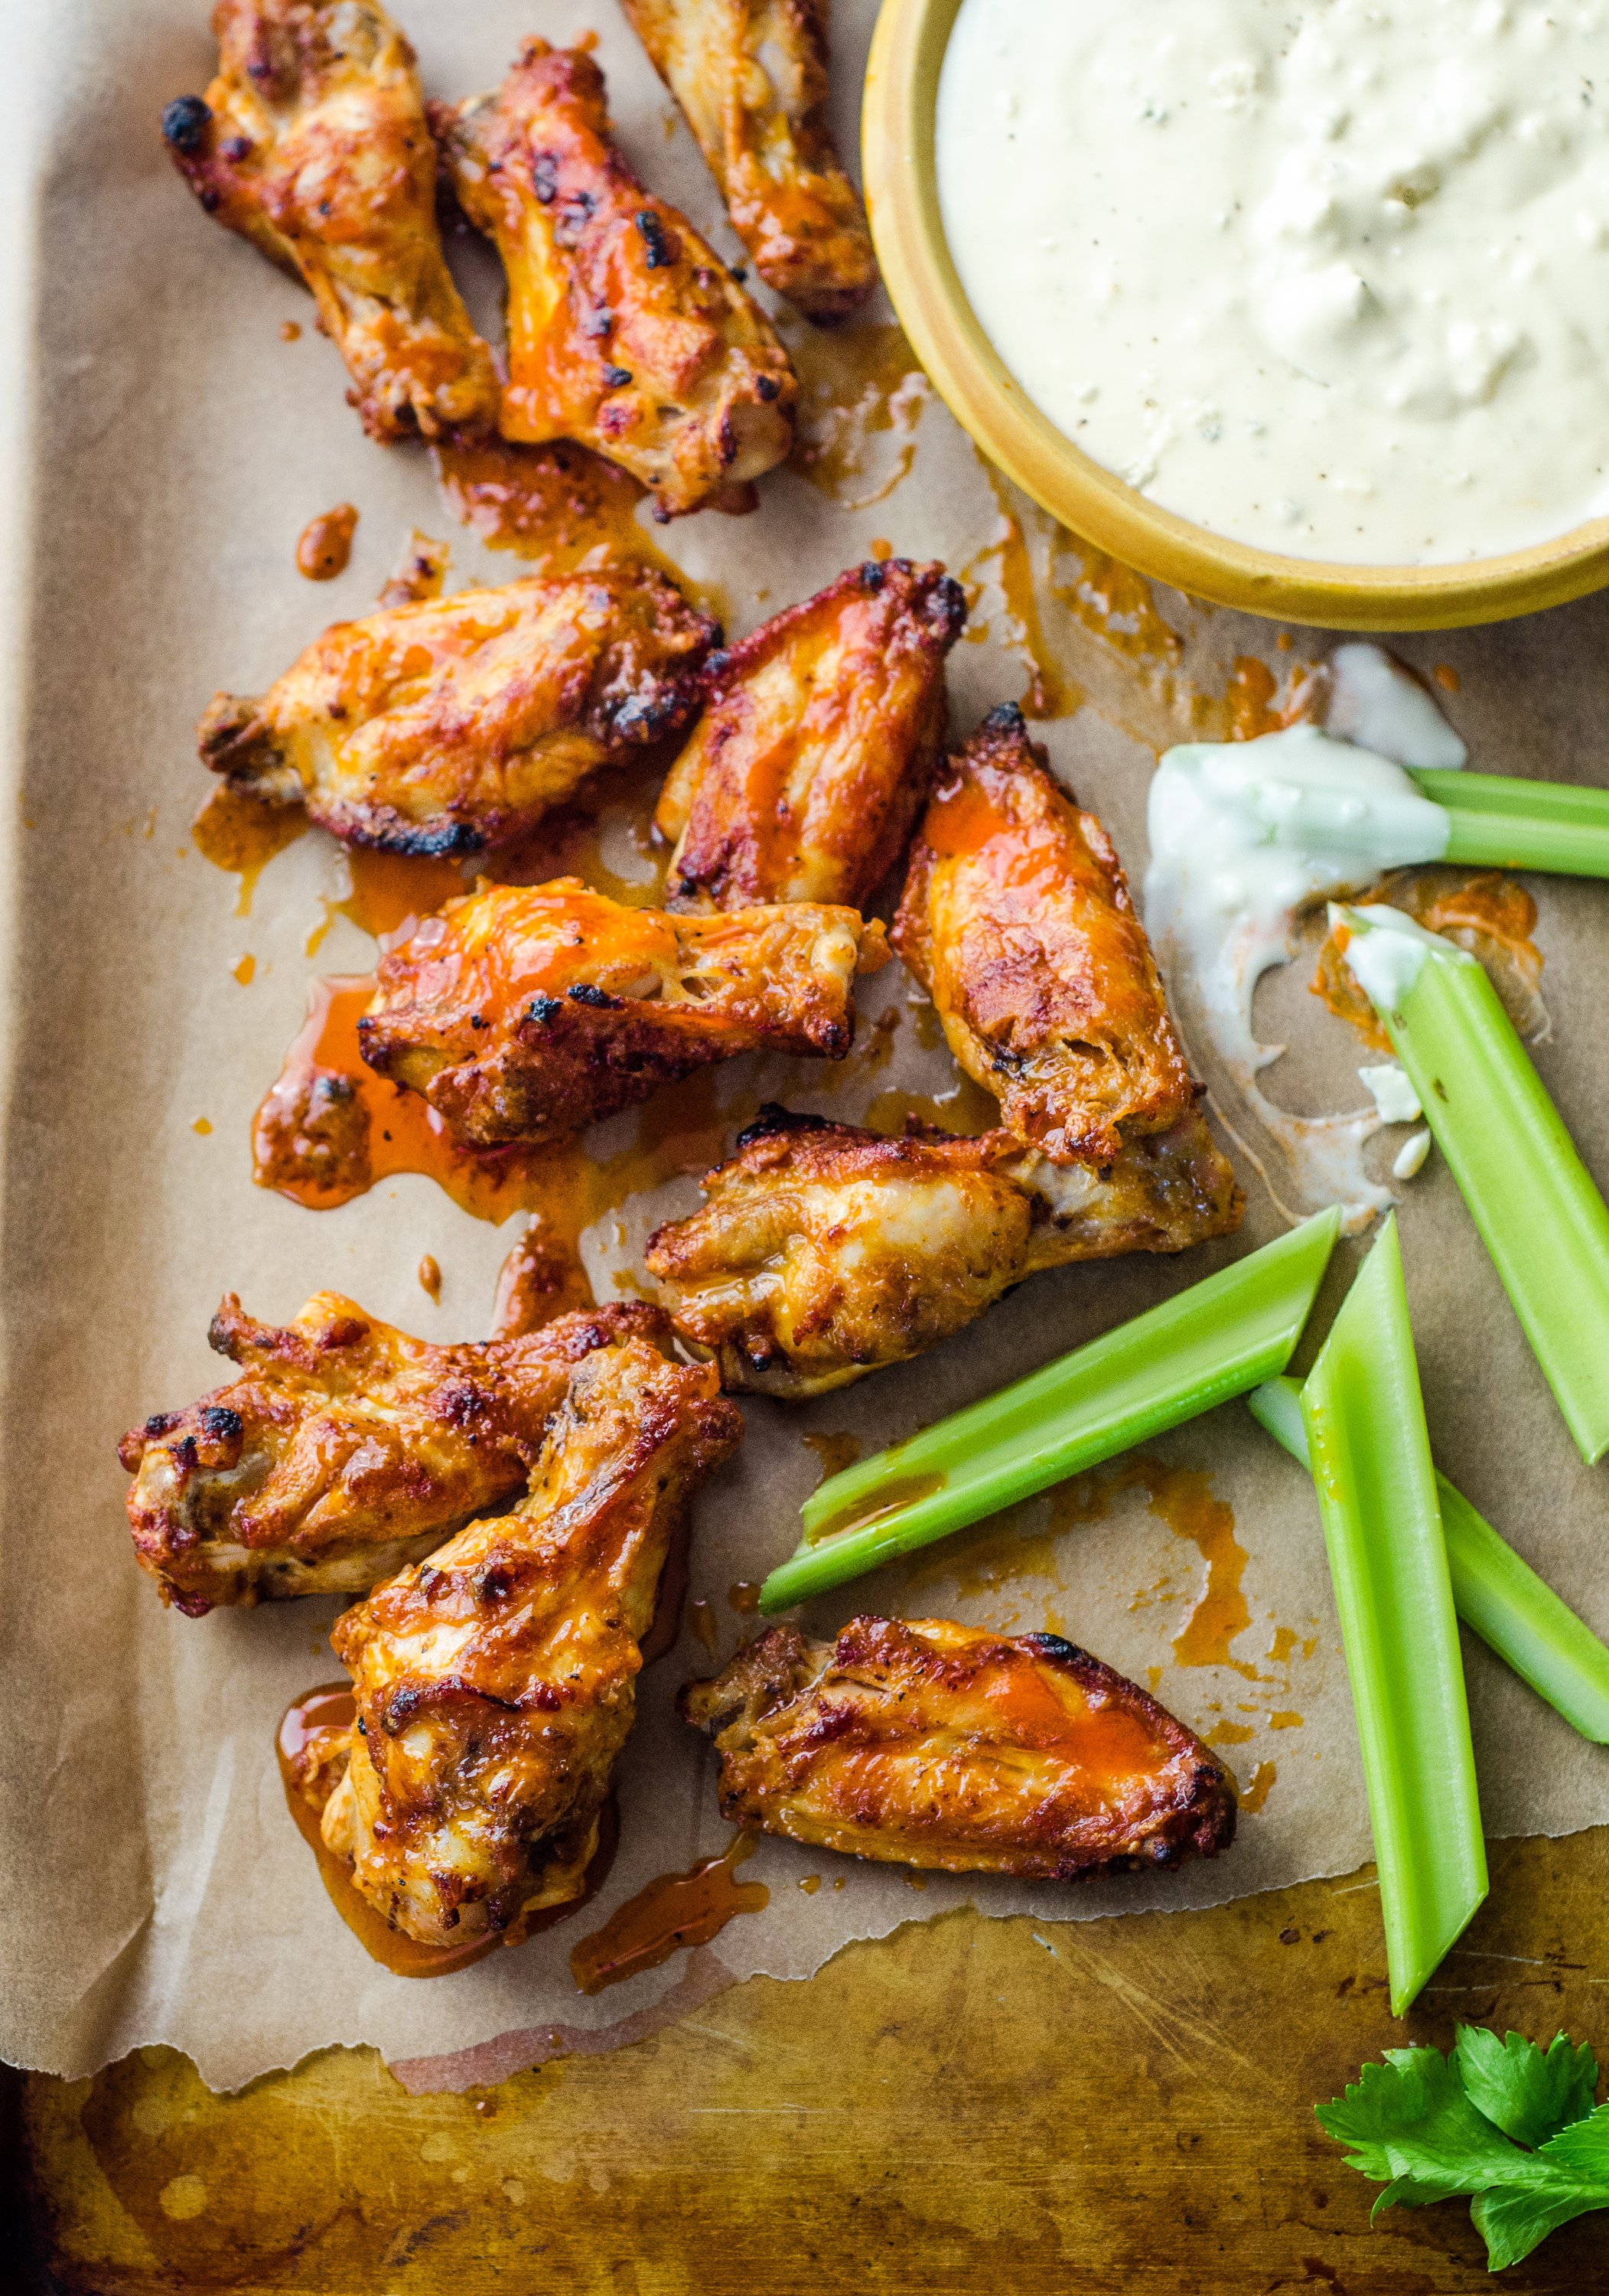 How To Make Buffalo Chicken Wings in the Oven | Kitchn